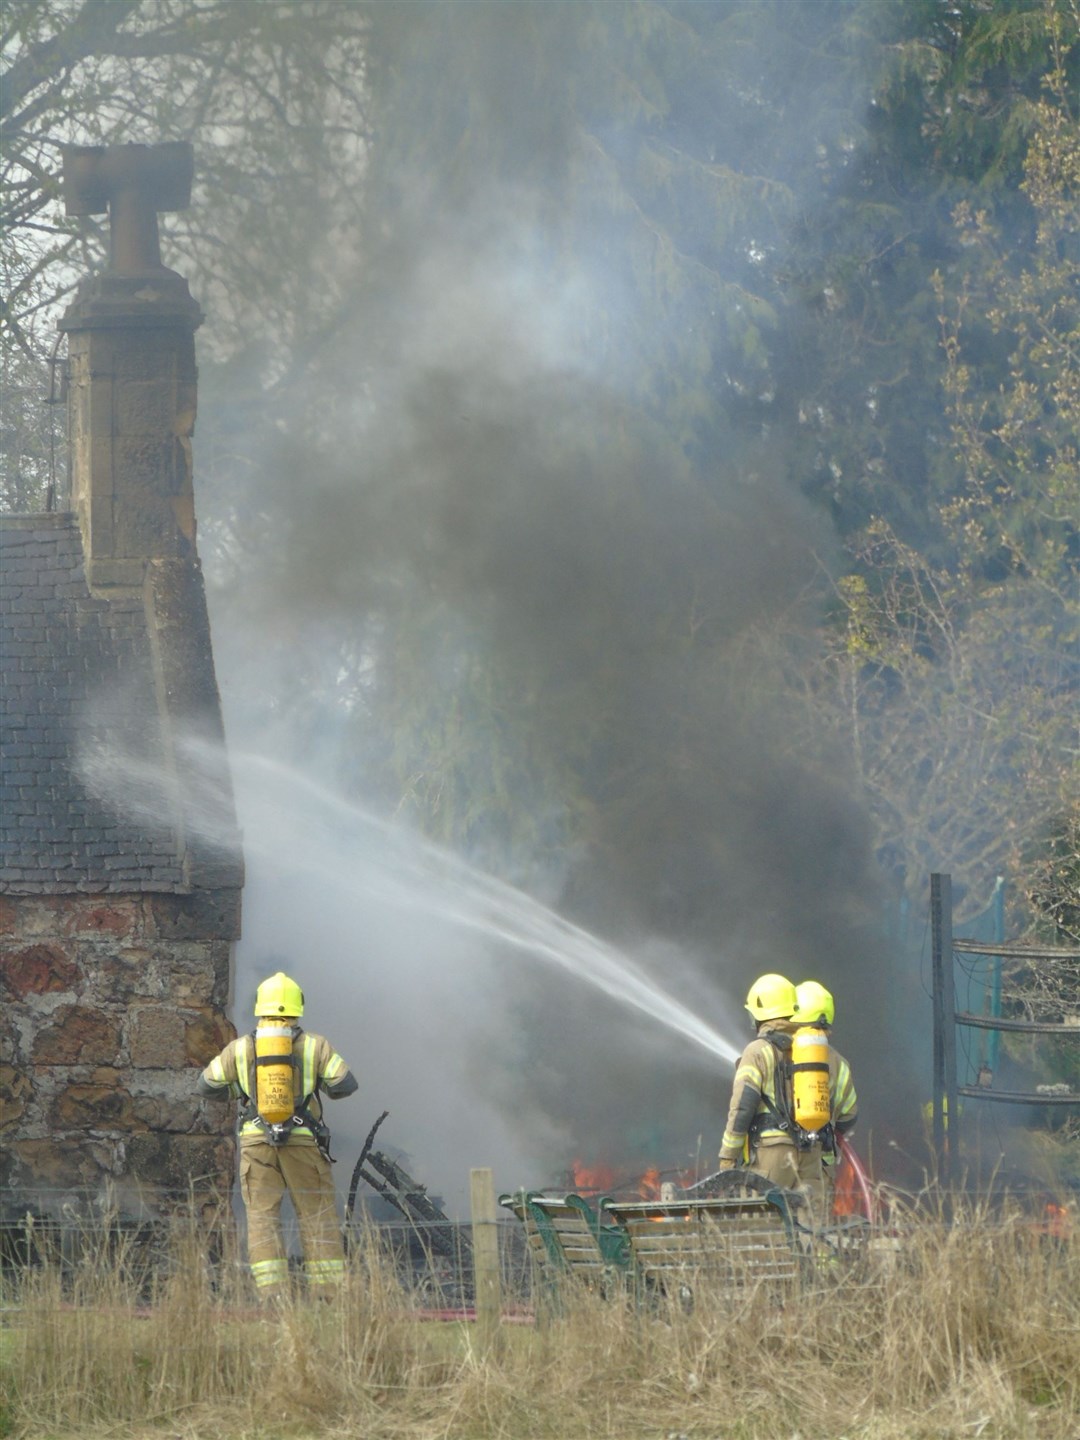 Firemen getting the blaze under control. Picture by Keir Hardie.